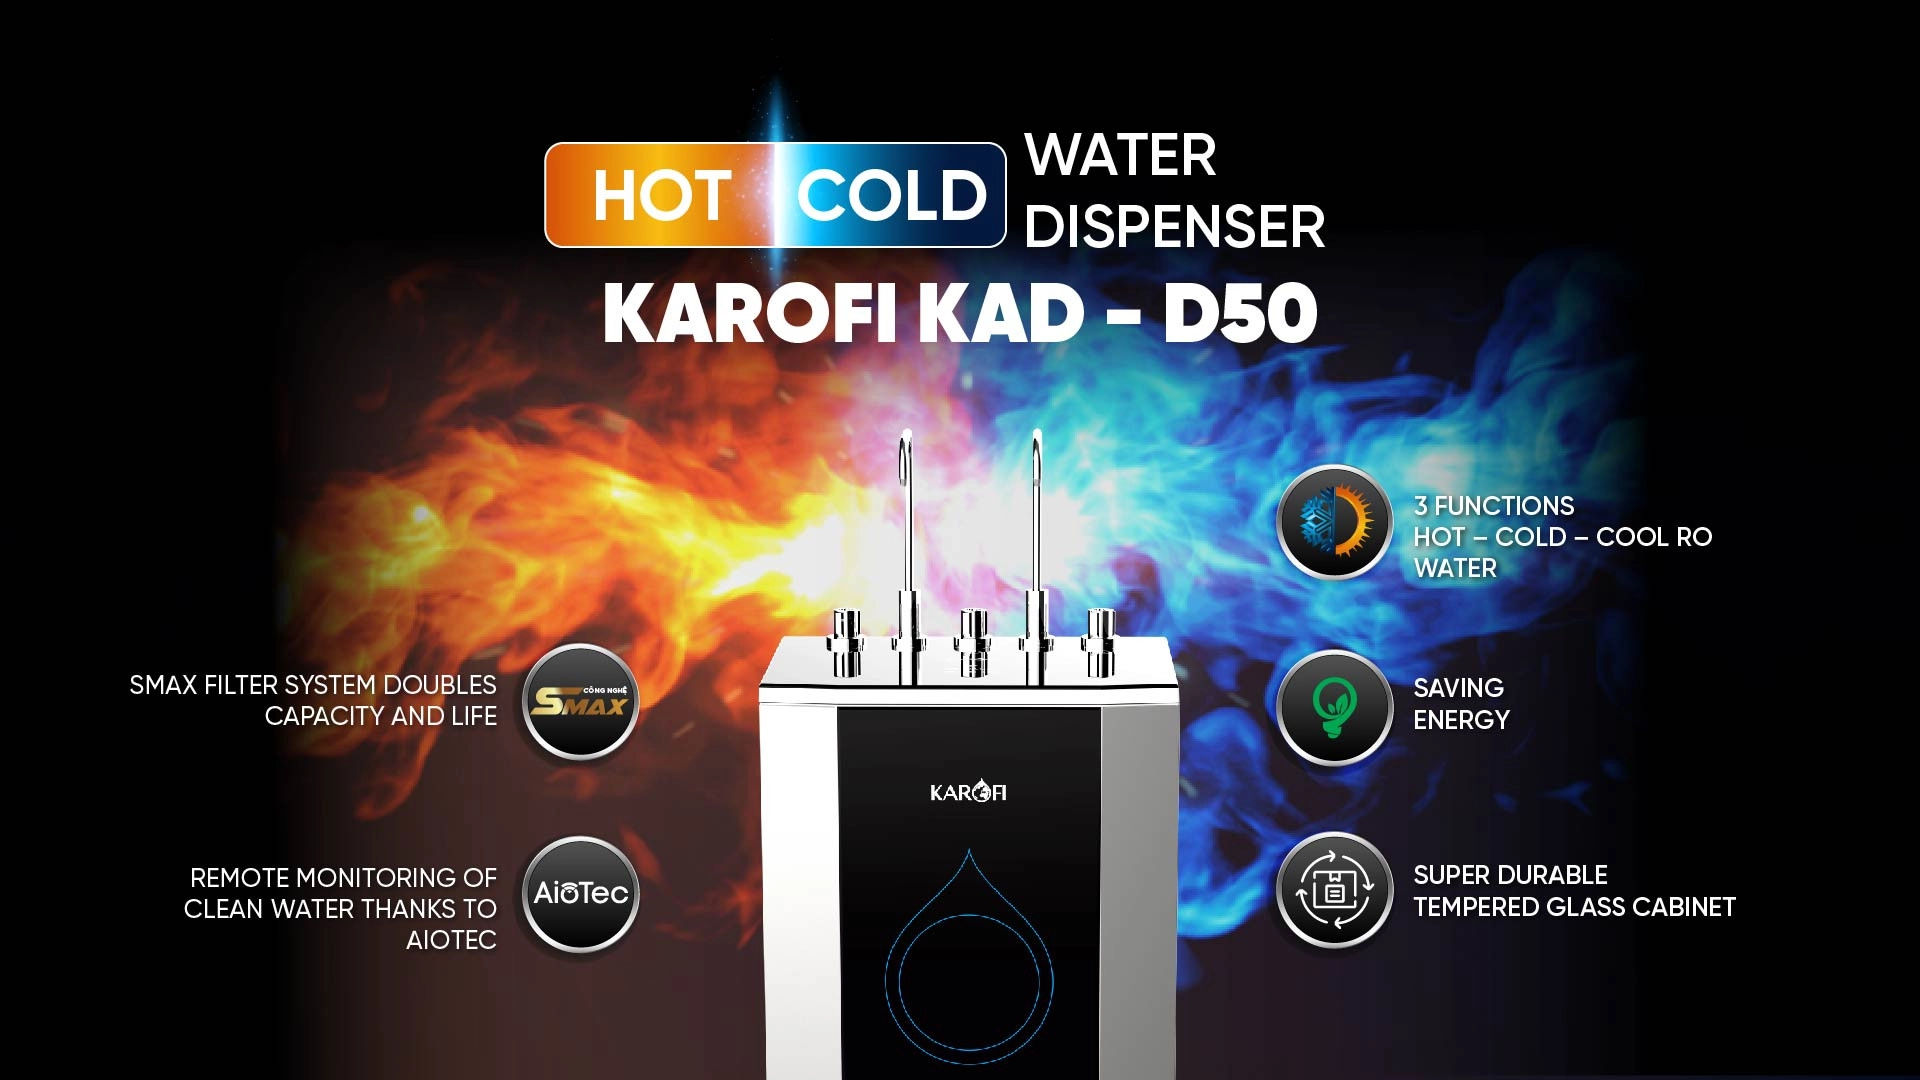 D50 - THE FIRST INTELLIGENT HOT COLD WATER PILTER